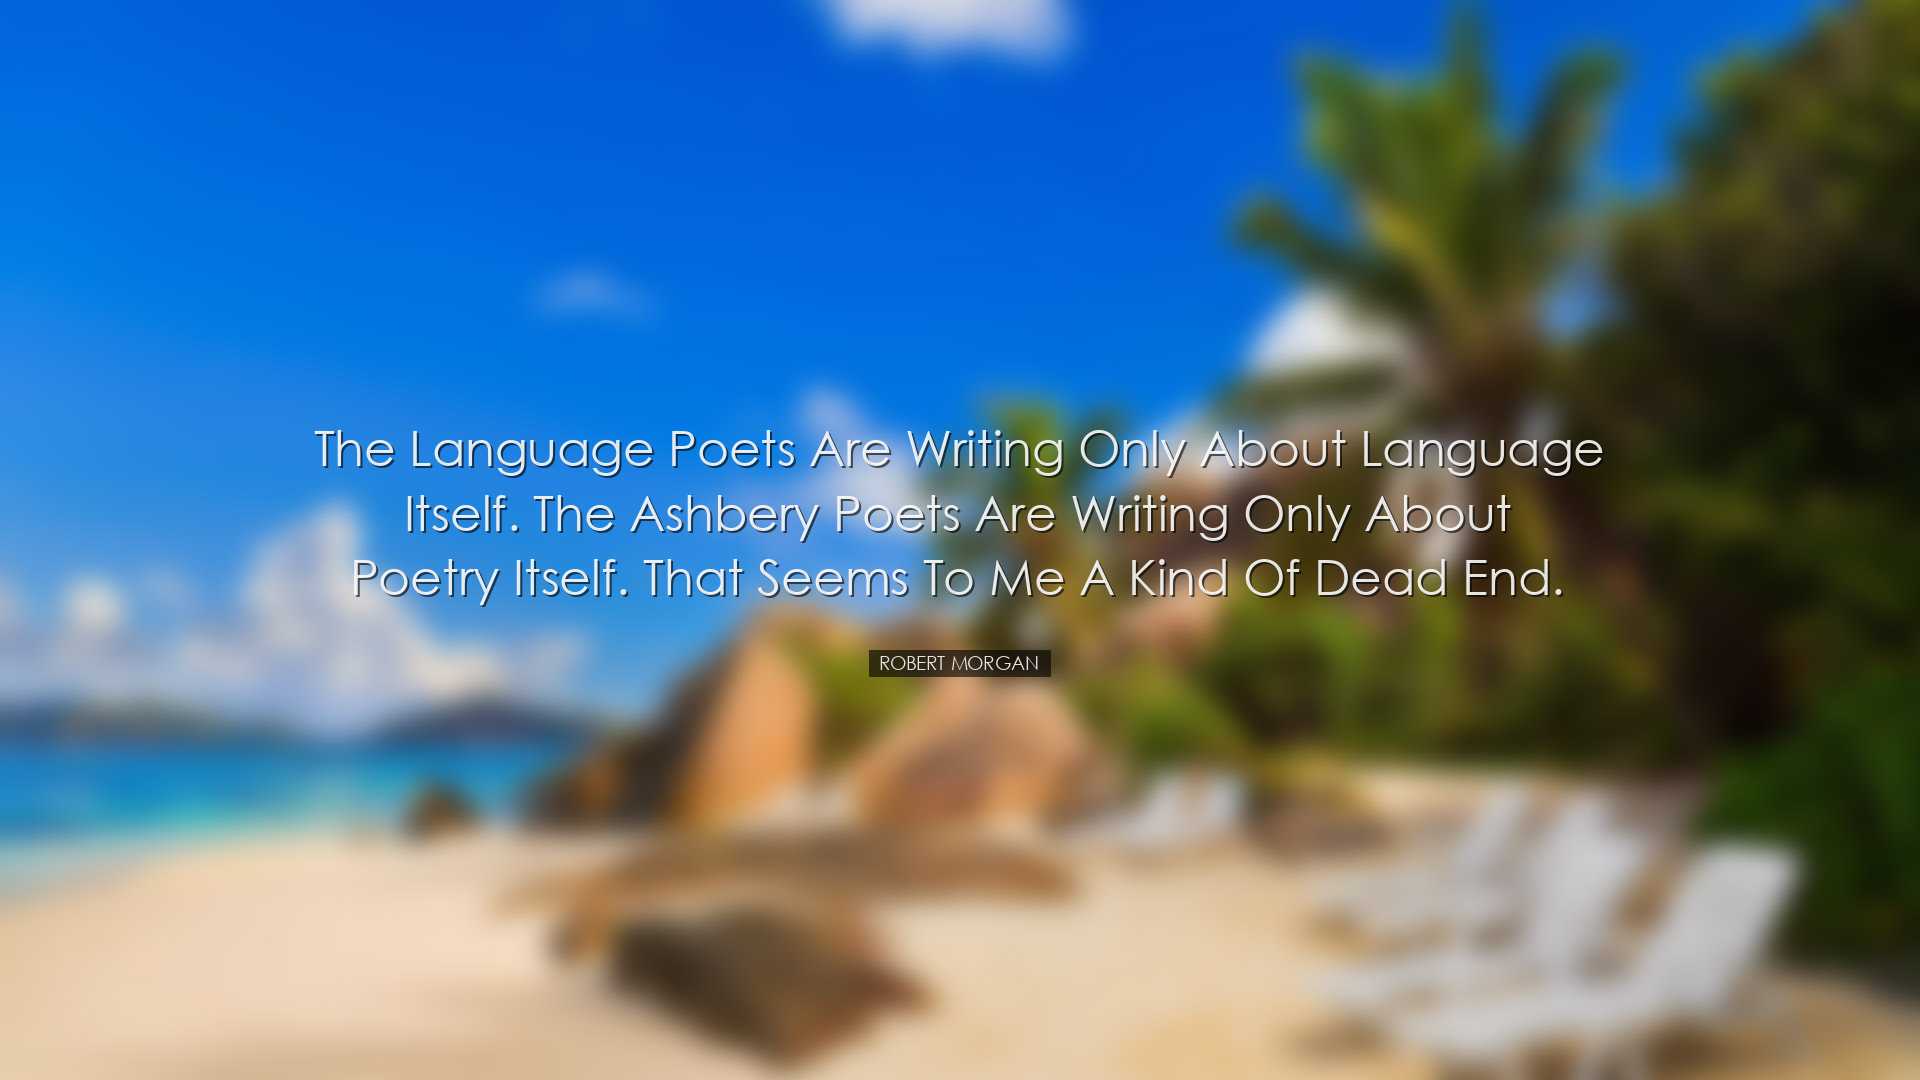 The Language Poets are writing only about language itself. The Ash